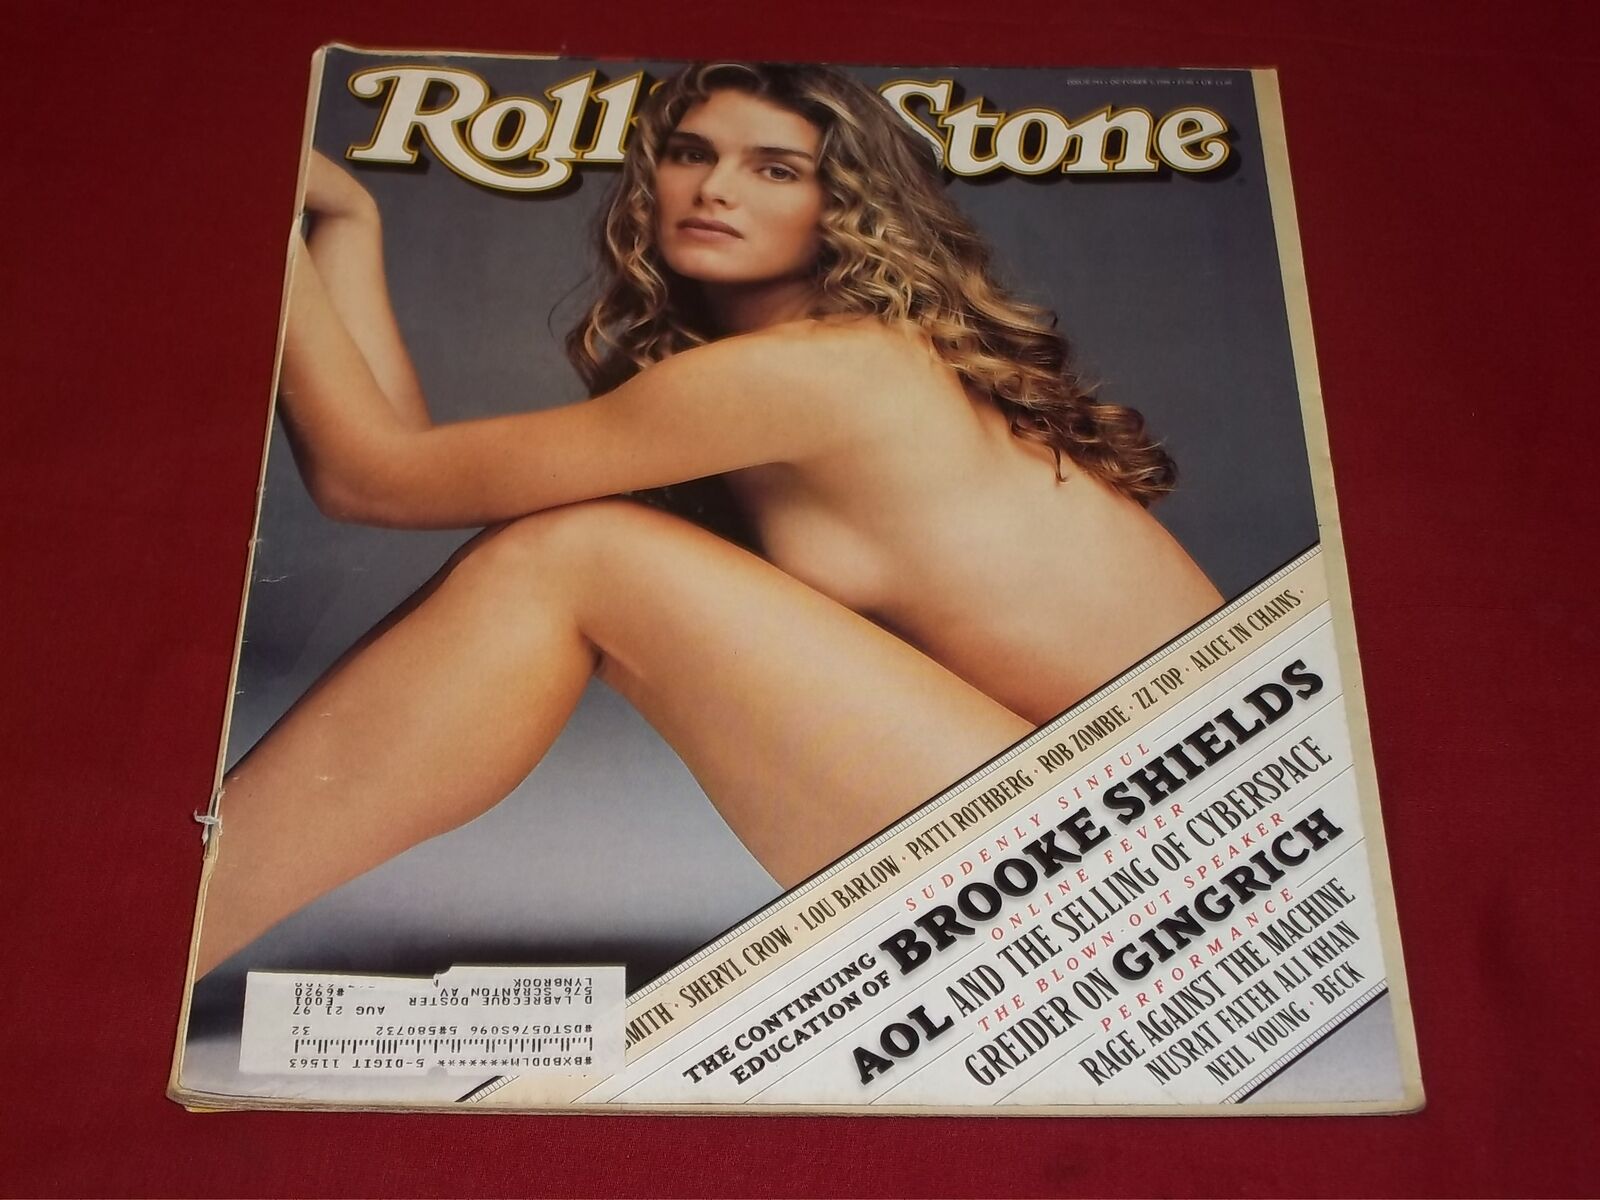 brendon dewitt recommends Young Naked Brooke Shields